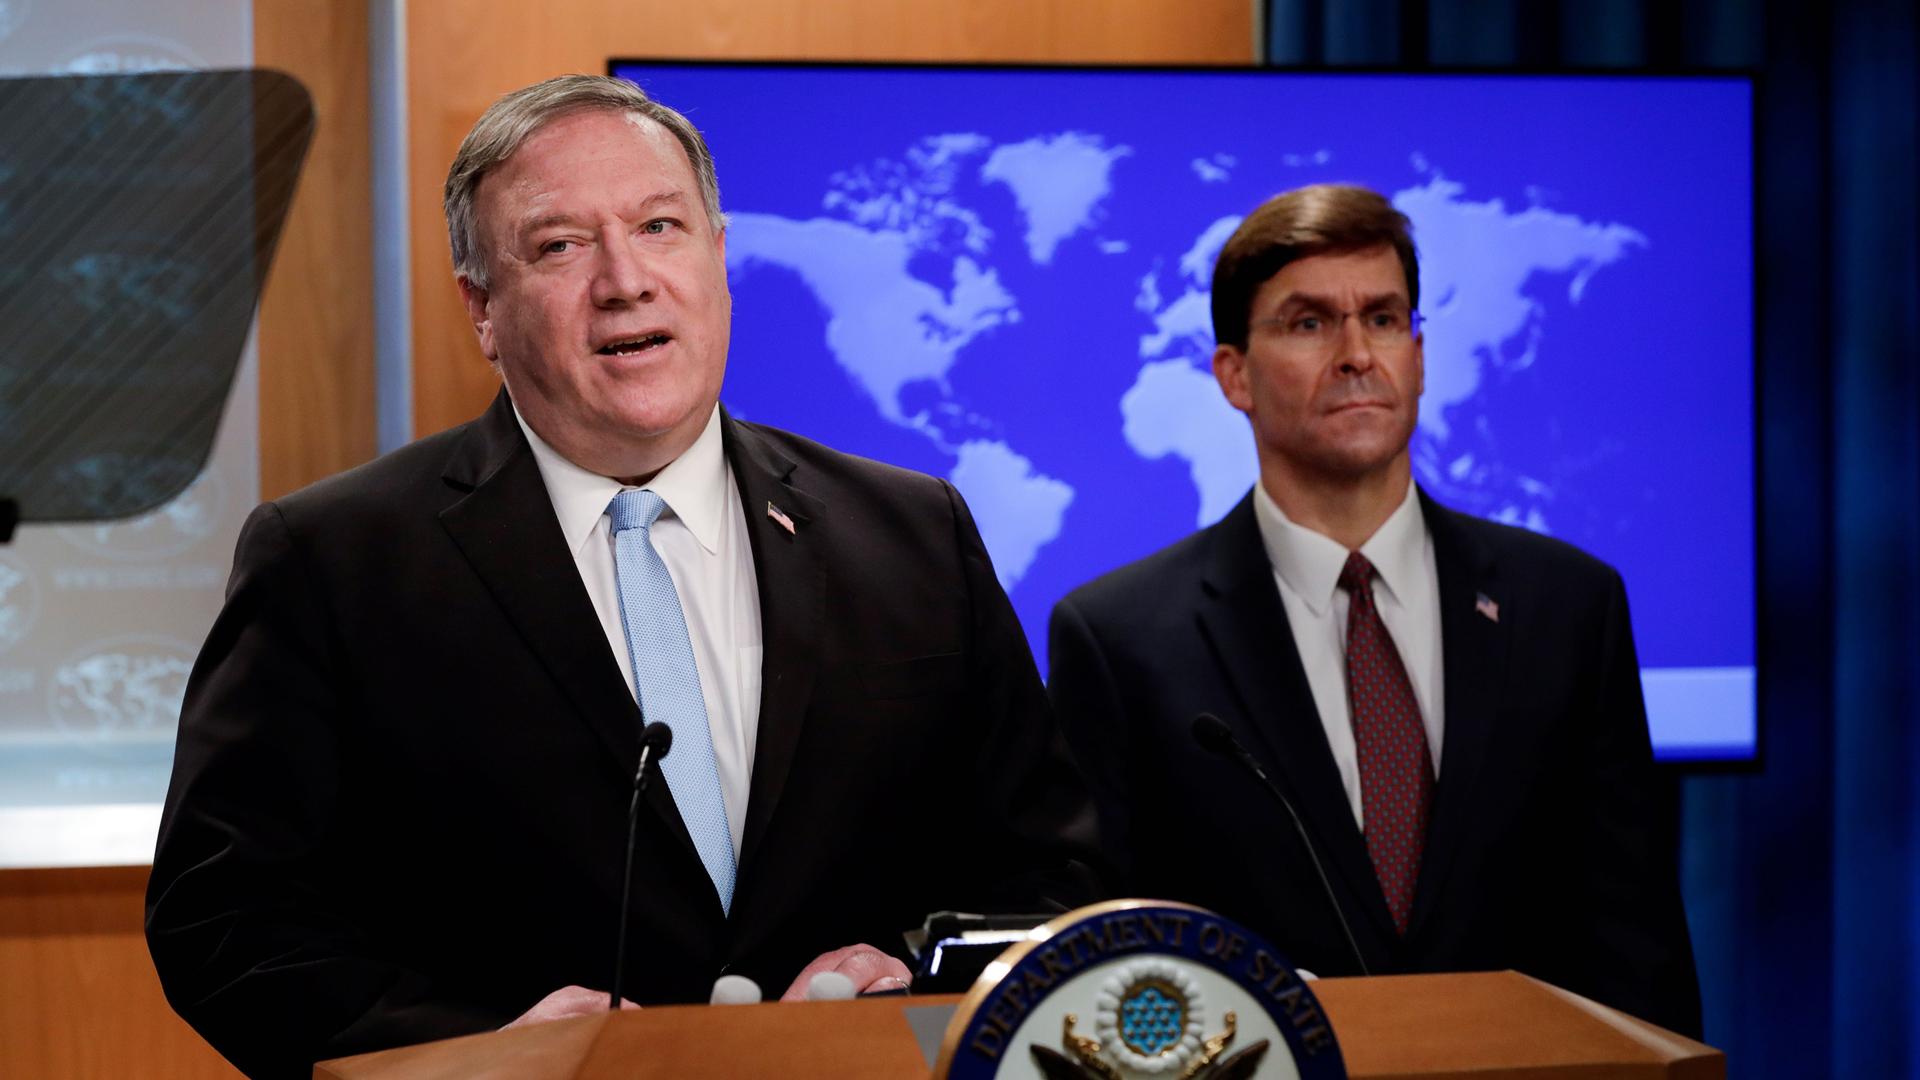 US Secretary of State Mike Pompeo speaks about a Trump administration executive order on the International Criminal Court as Defense Secretary Mark Esper listens during a joint news conference at the State Department in Washington, June 11, 2020. 